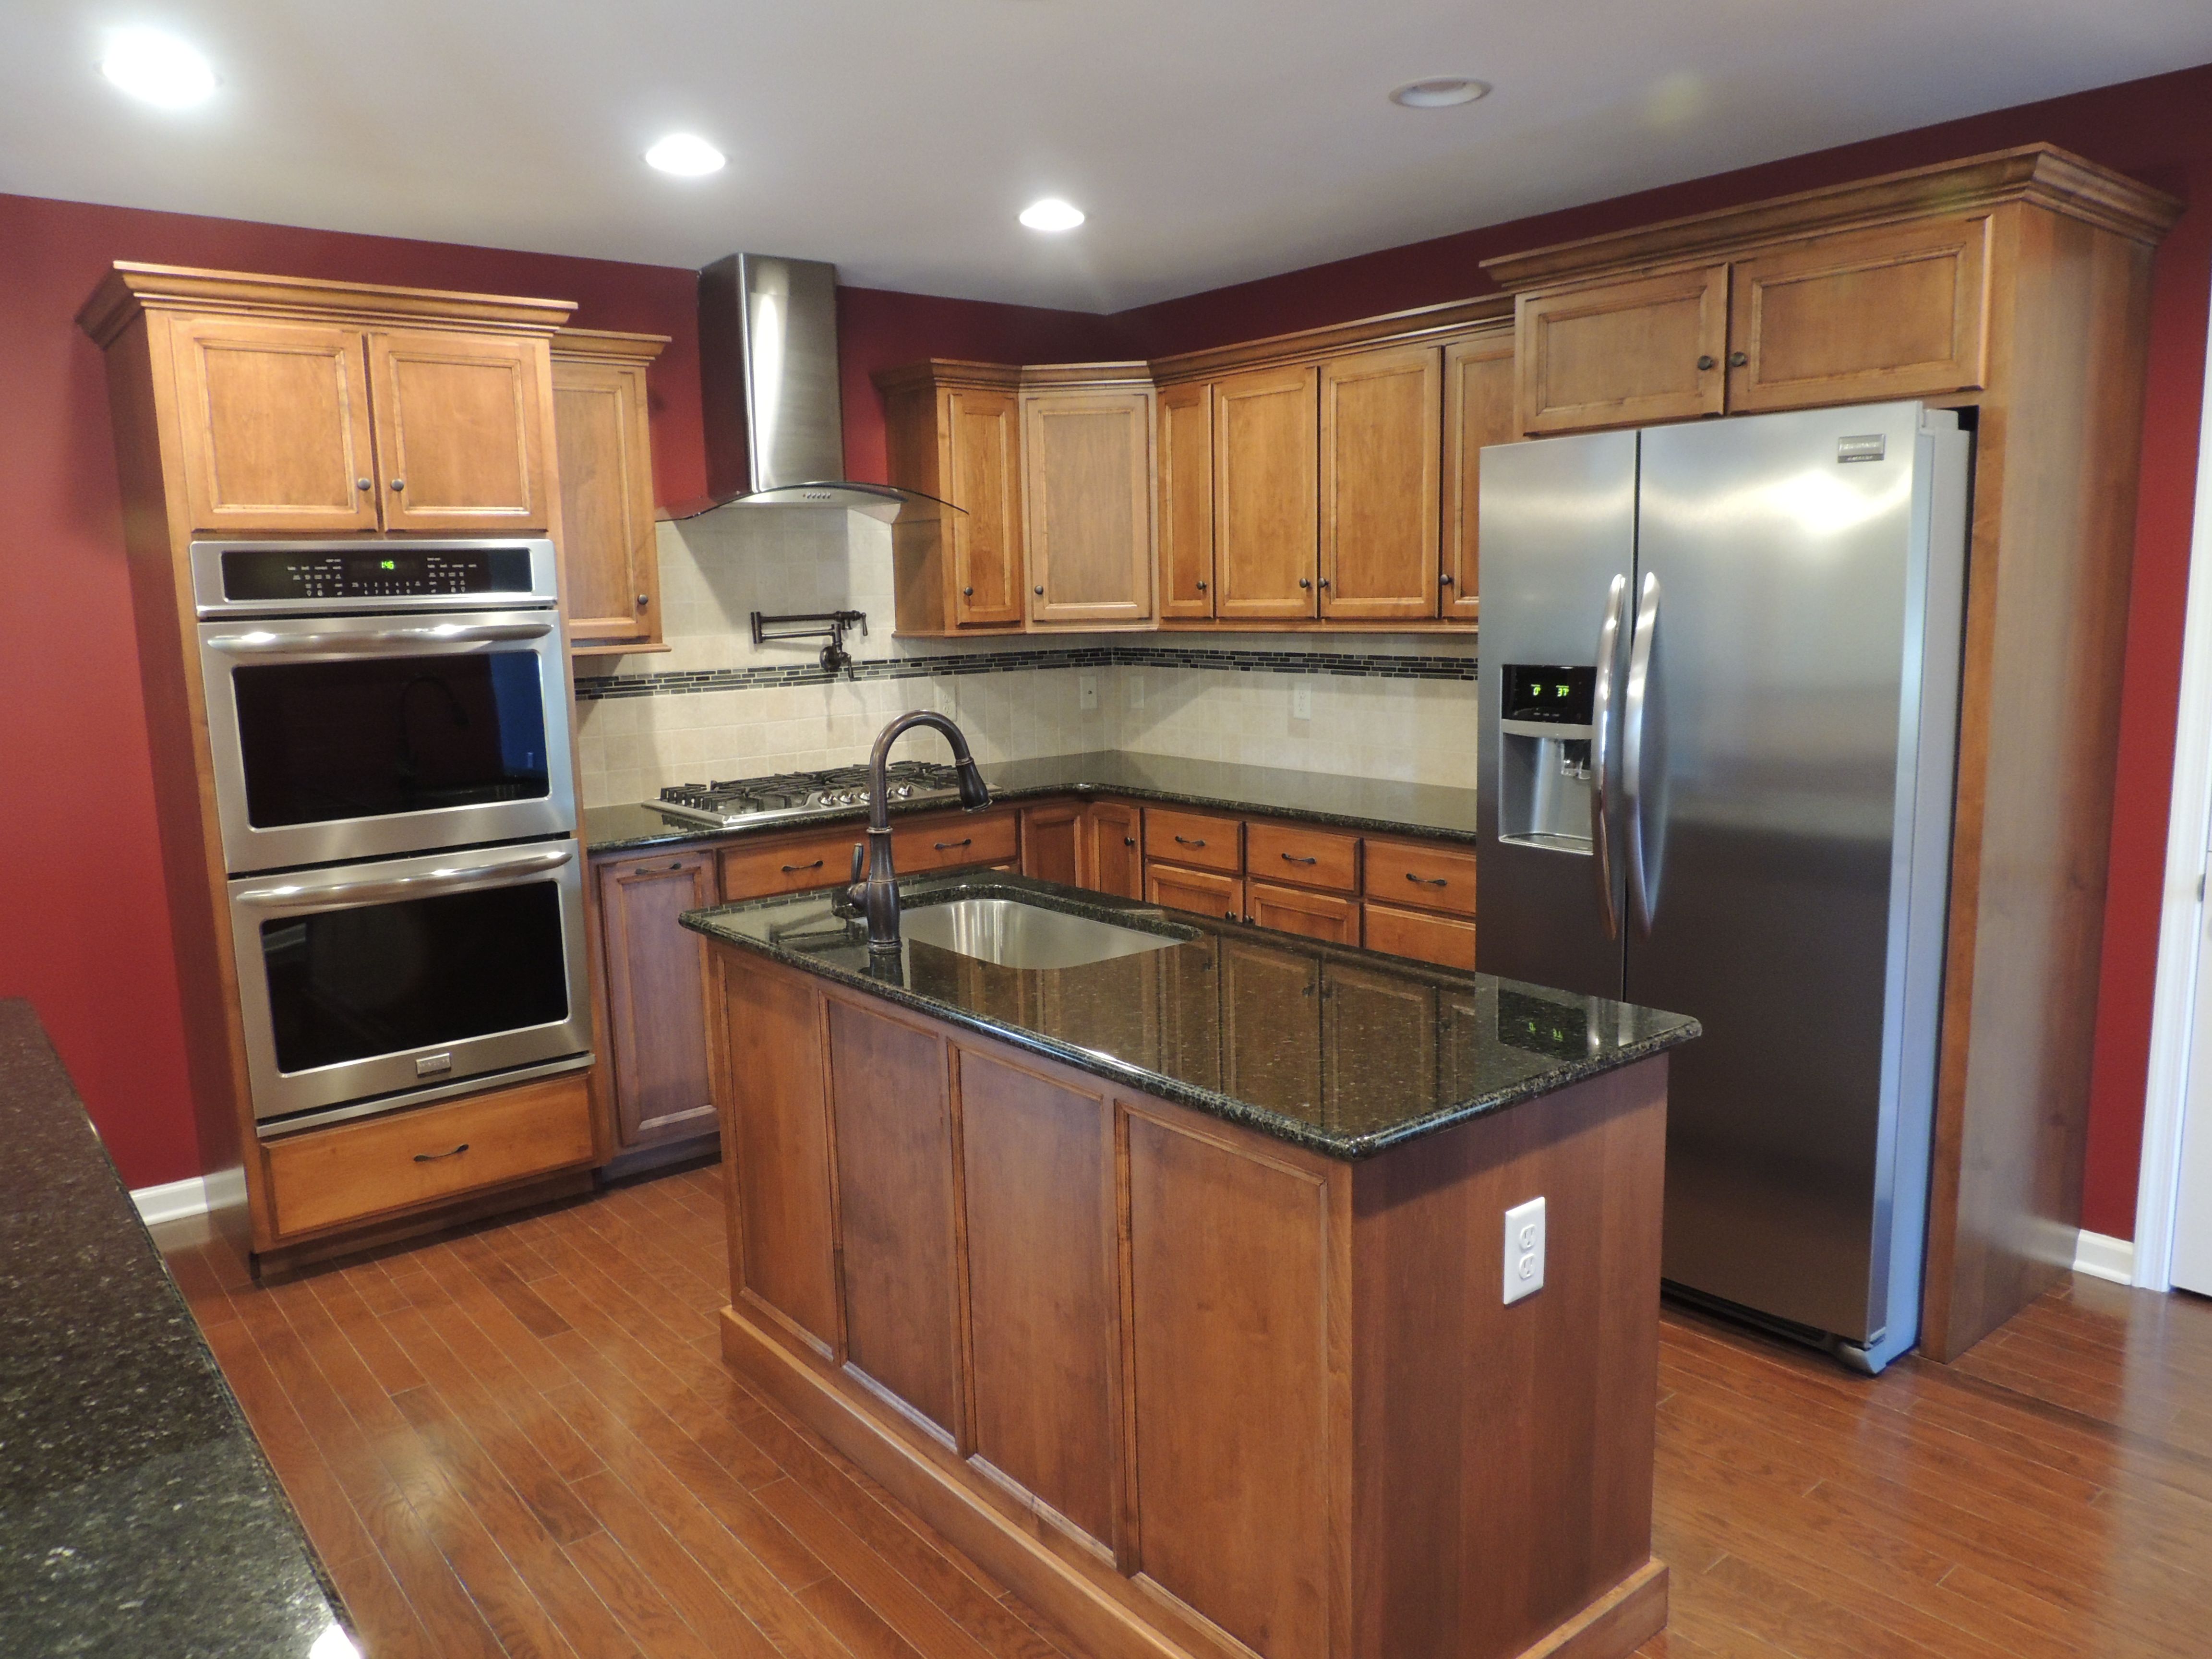 Stainless steel appliances are so sharp looking with this kitchen! #